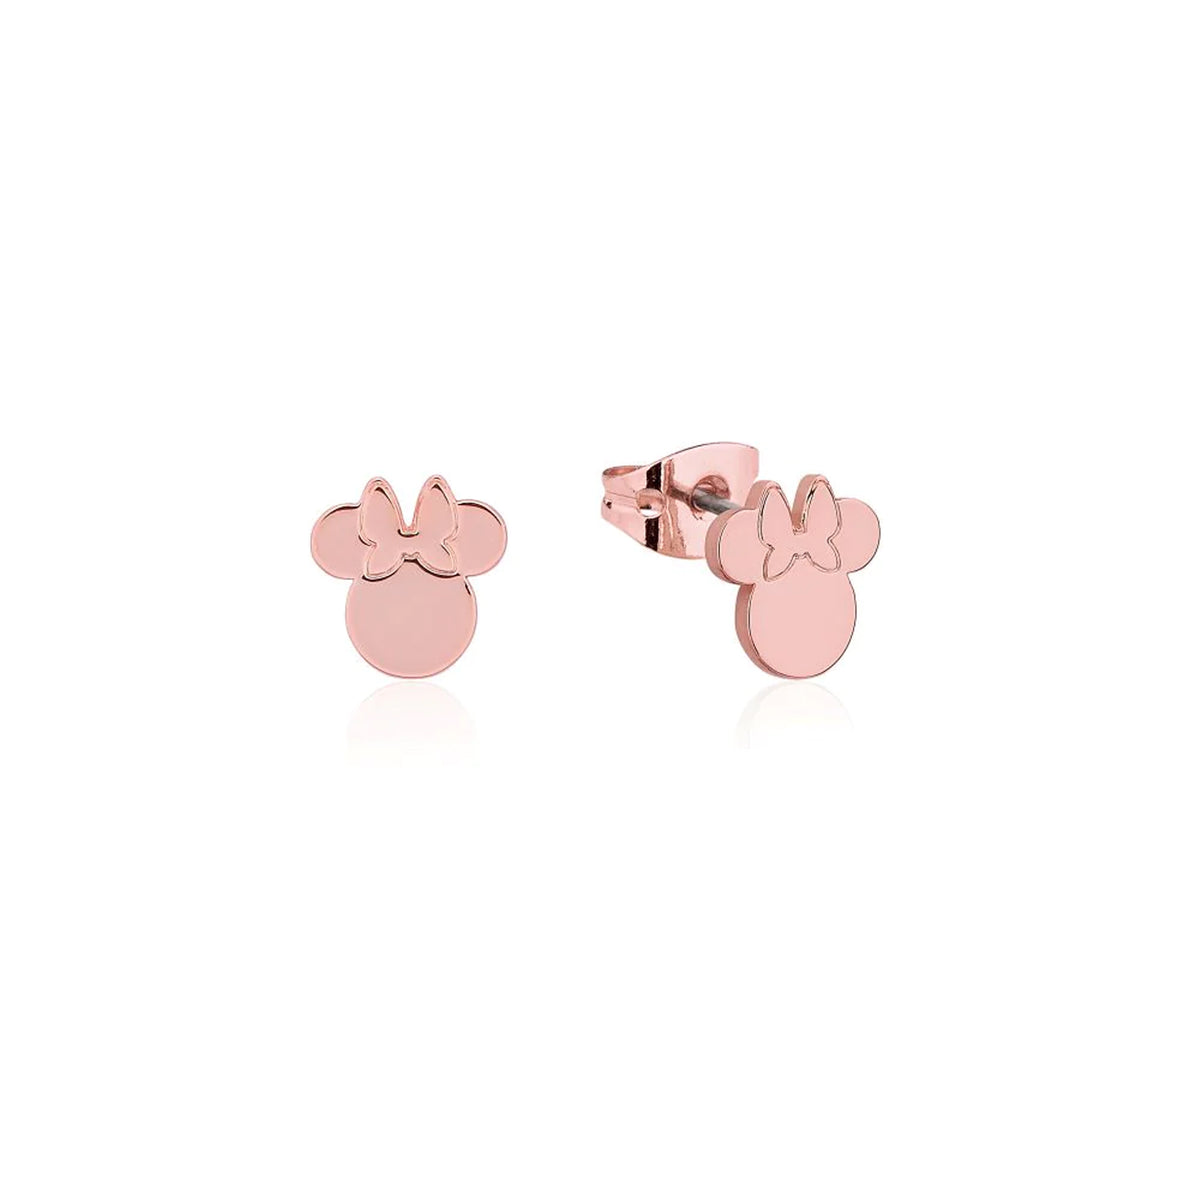 Disney Minnie Mouse Stud Earrings - Rose Gold